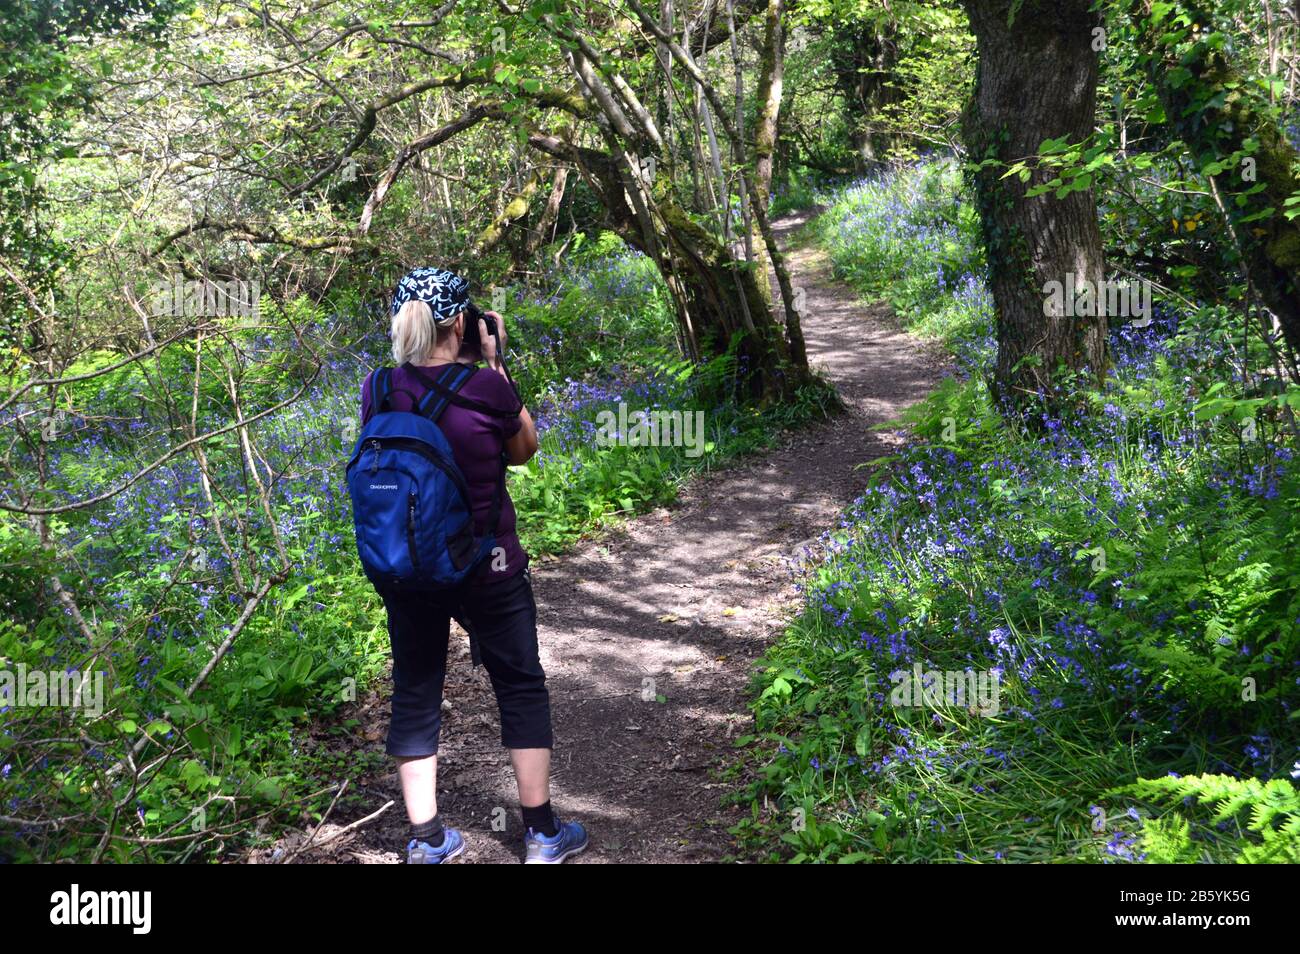 Woman Hiker Taking Photos with Camera in the National Trusts Worthygate Woods near Buck's Mills on the South West Coast Path, North Devon, UK. Stock Photo